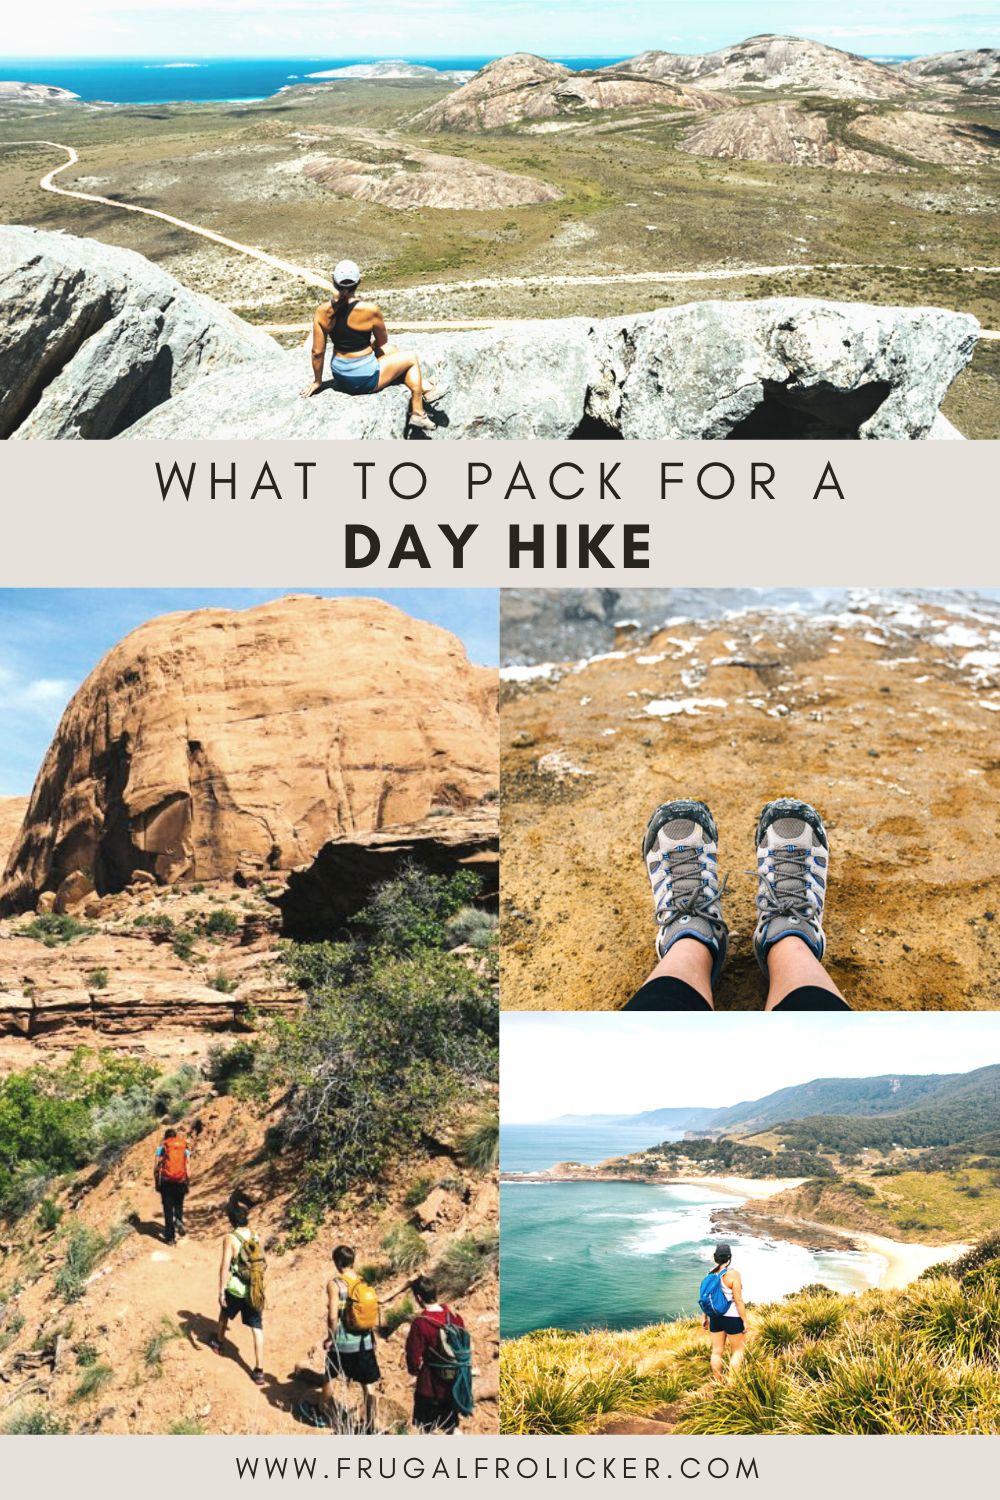 Packing For A Day Hike | Your Day Hike Packing List